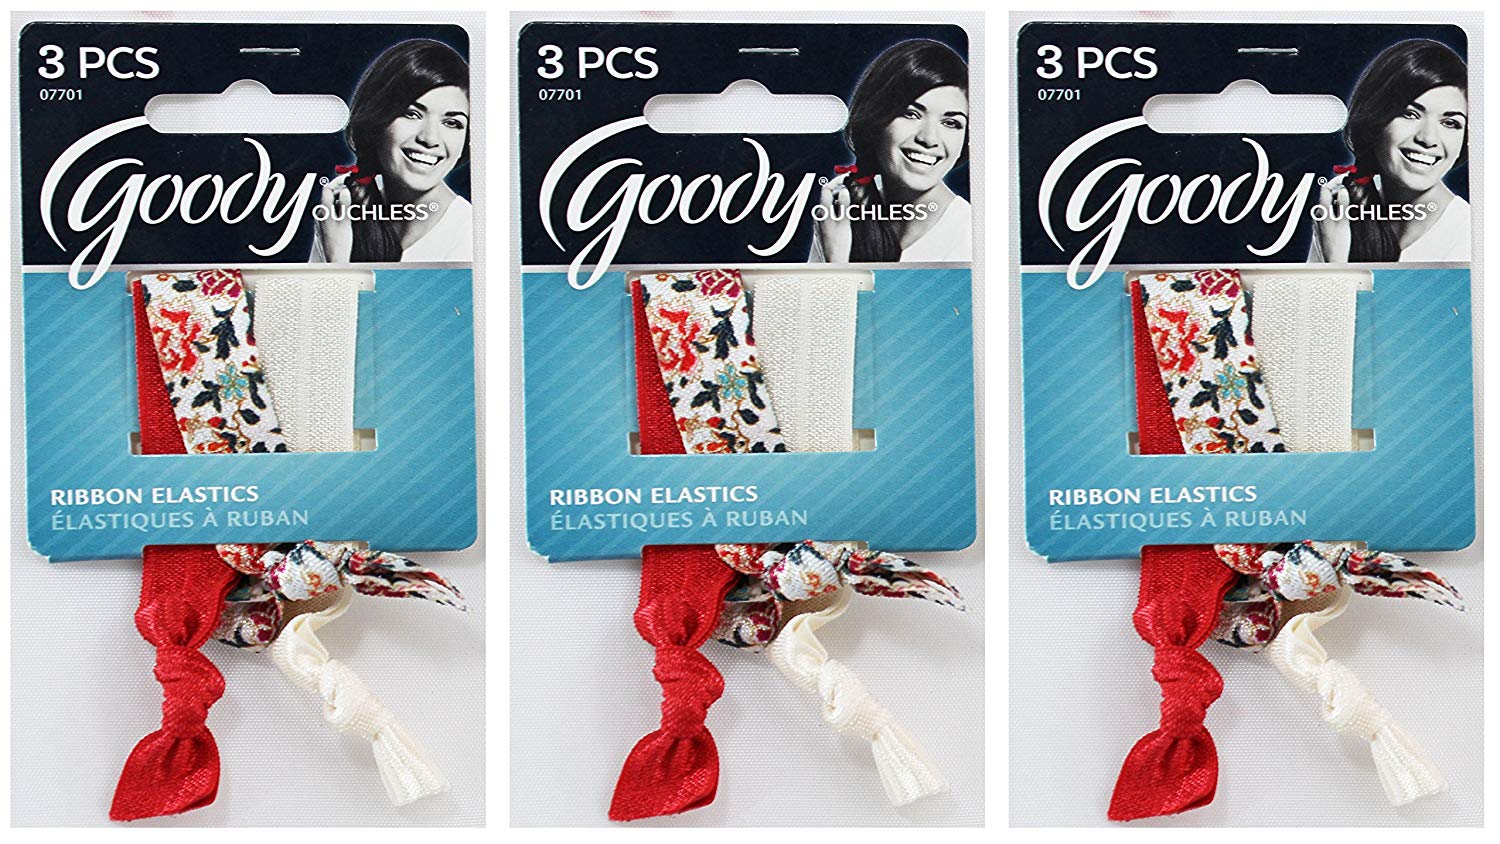 Goody WoMens Ouchless Ribbon Elastics, Vintage Floral White, 3 Count